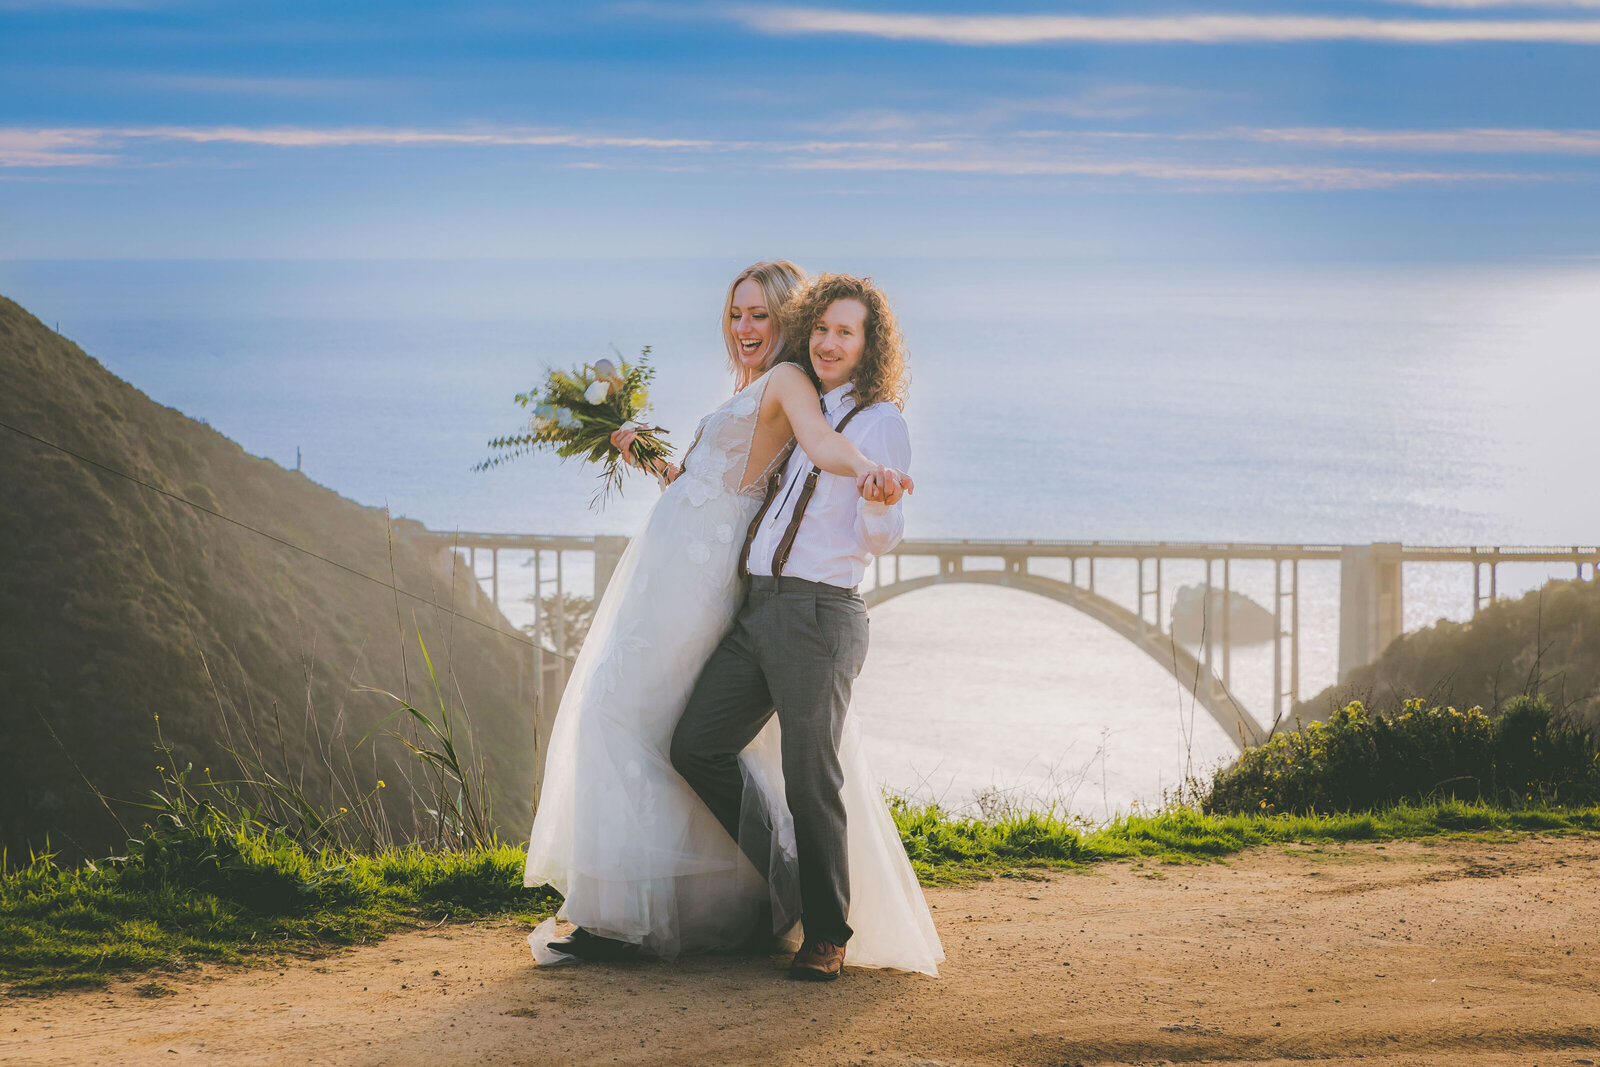 A wedded couple make silly poses with the Bixby Bridge in the background.